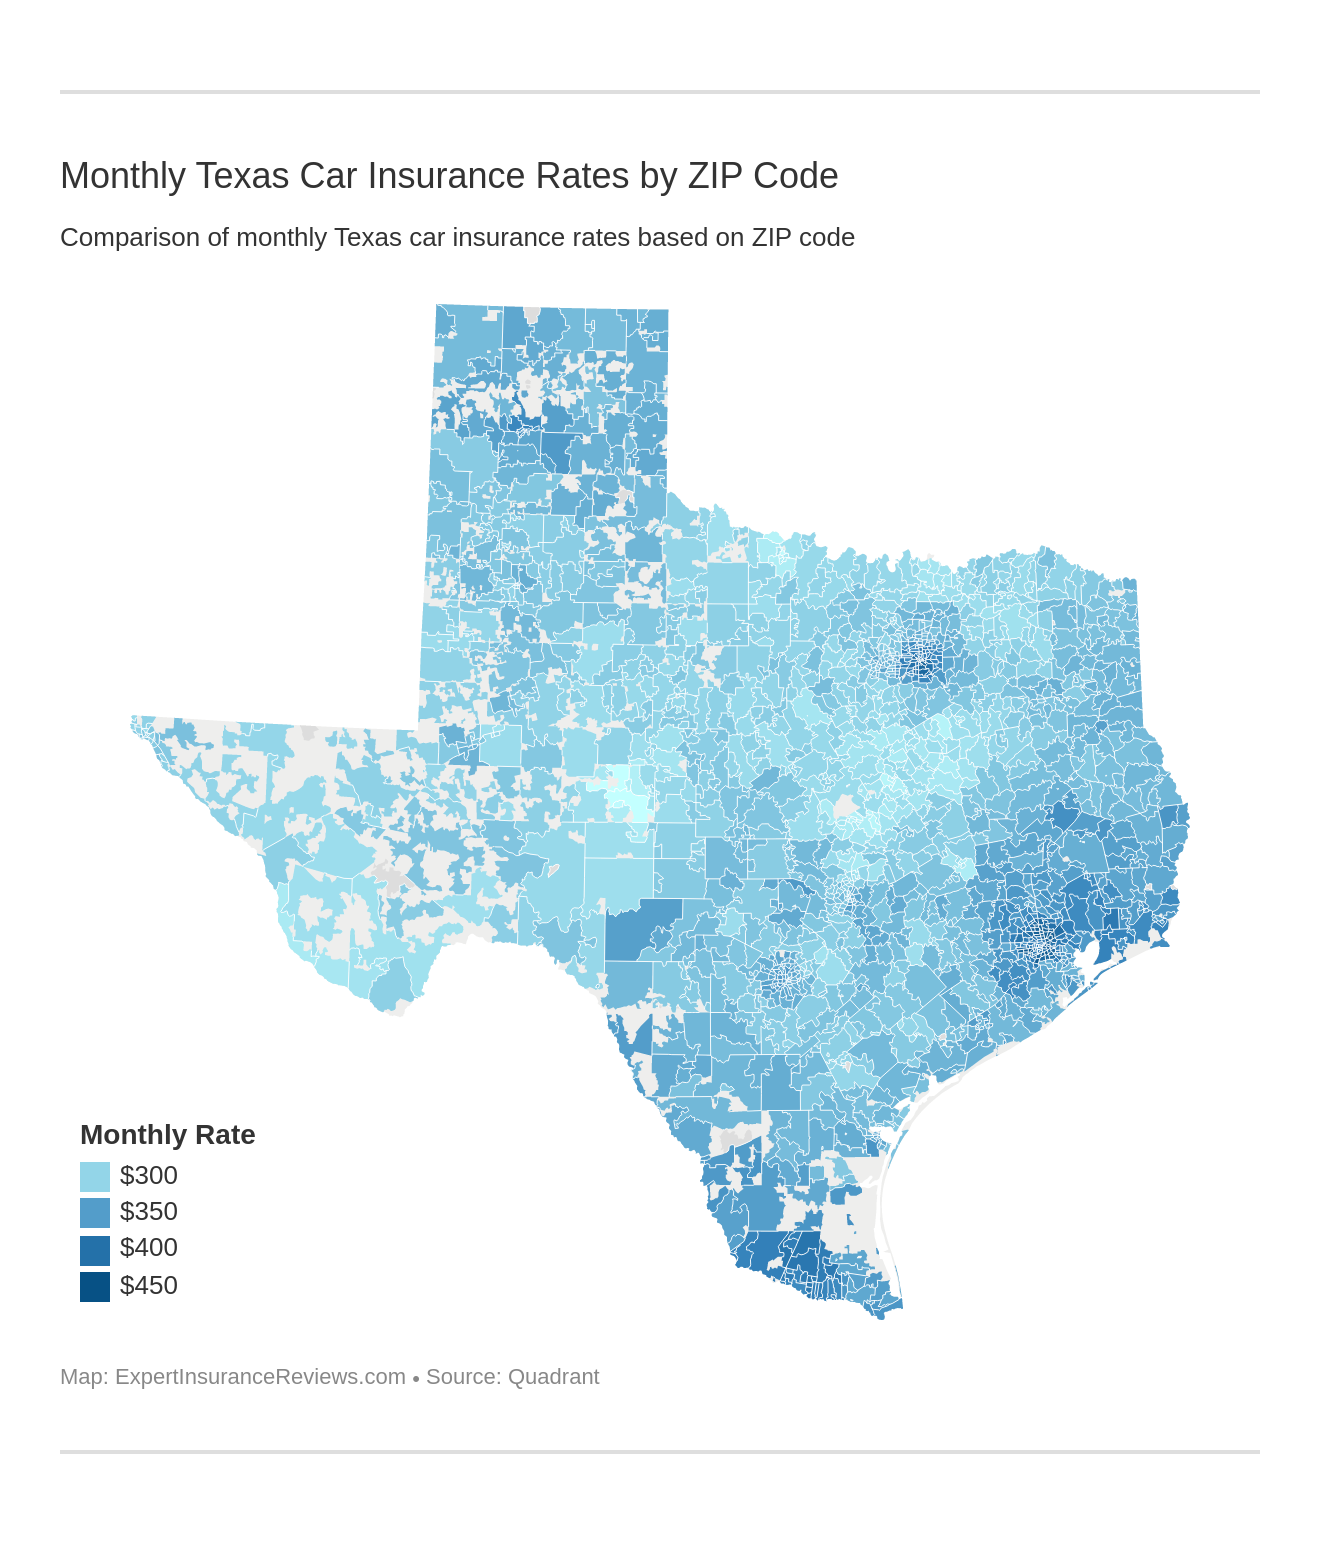 Monthly Texas Car Insurance Rates by ZIP Code